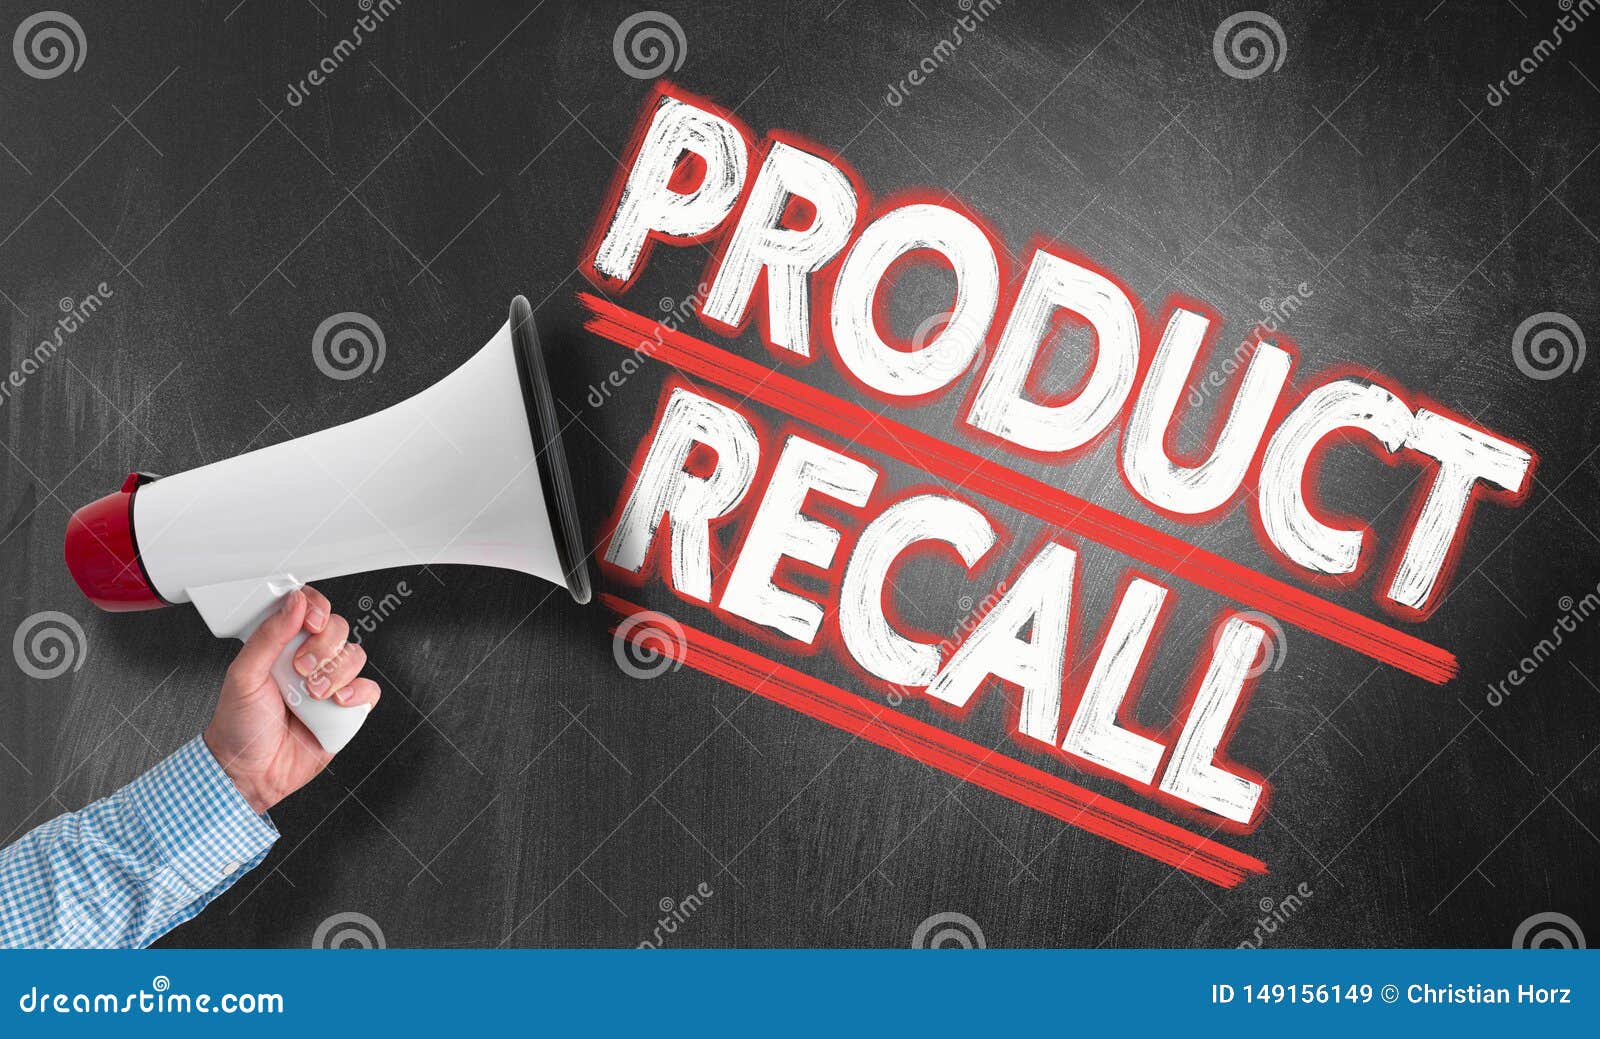 hand holding megaphone against blackboard with text product recall